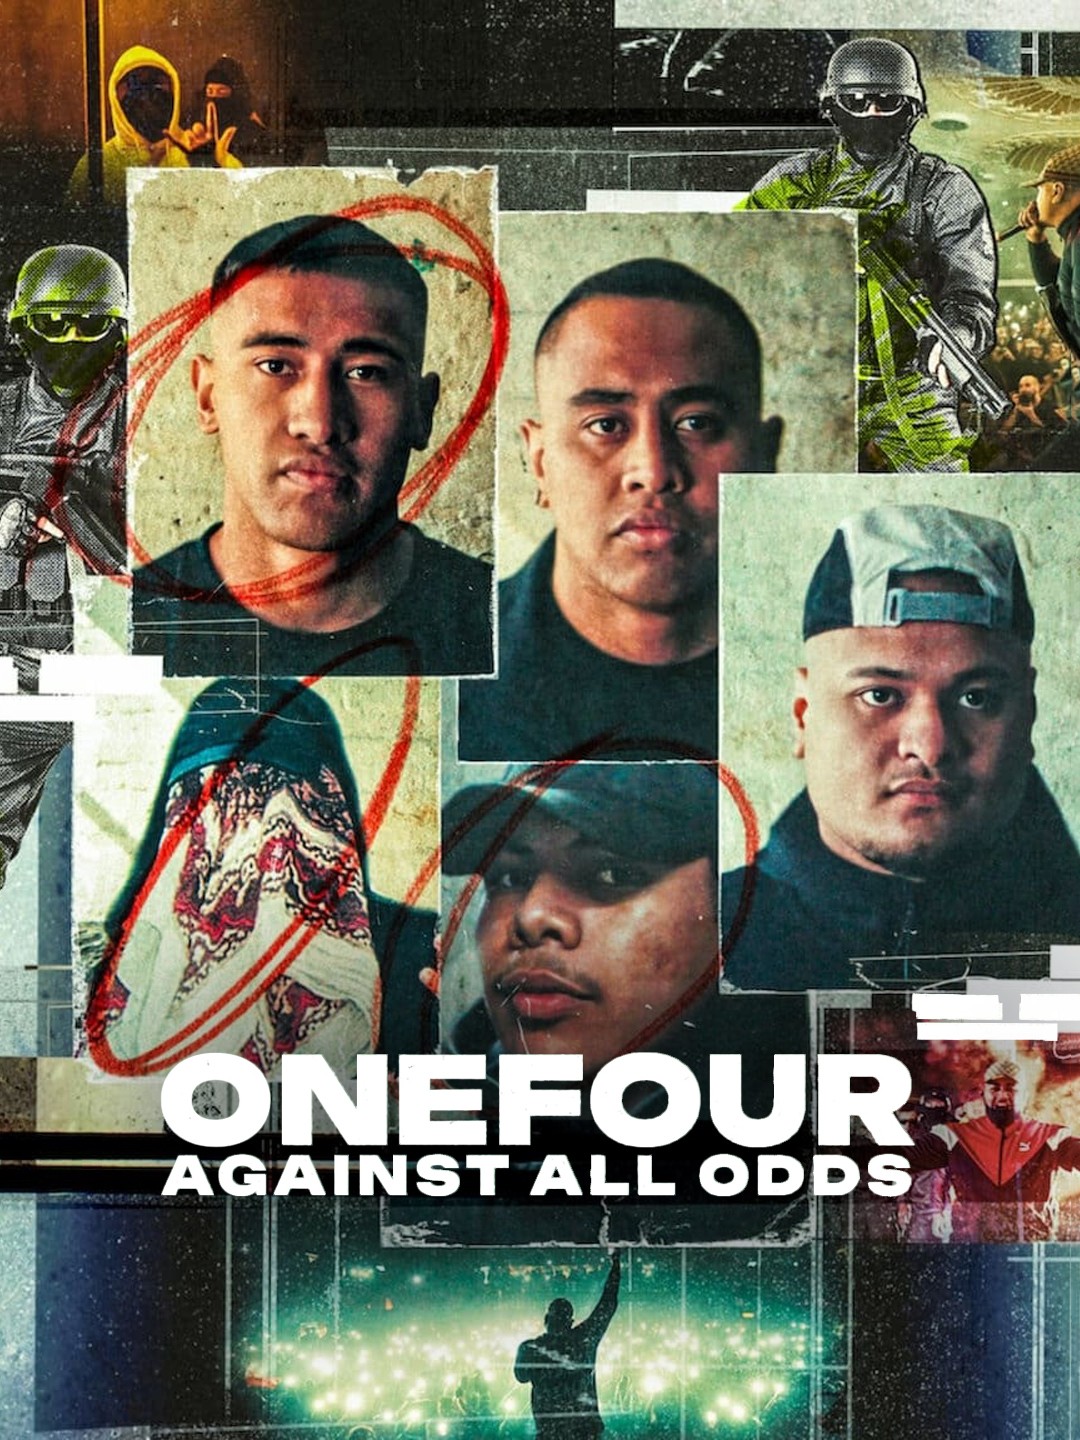 Against All Odds - Rotten Tomatoes